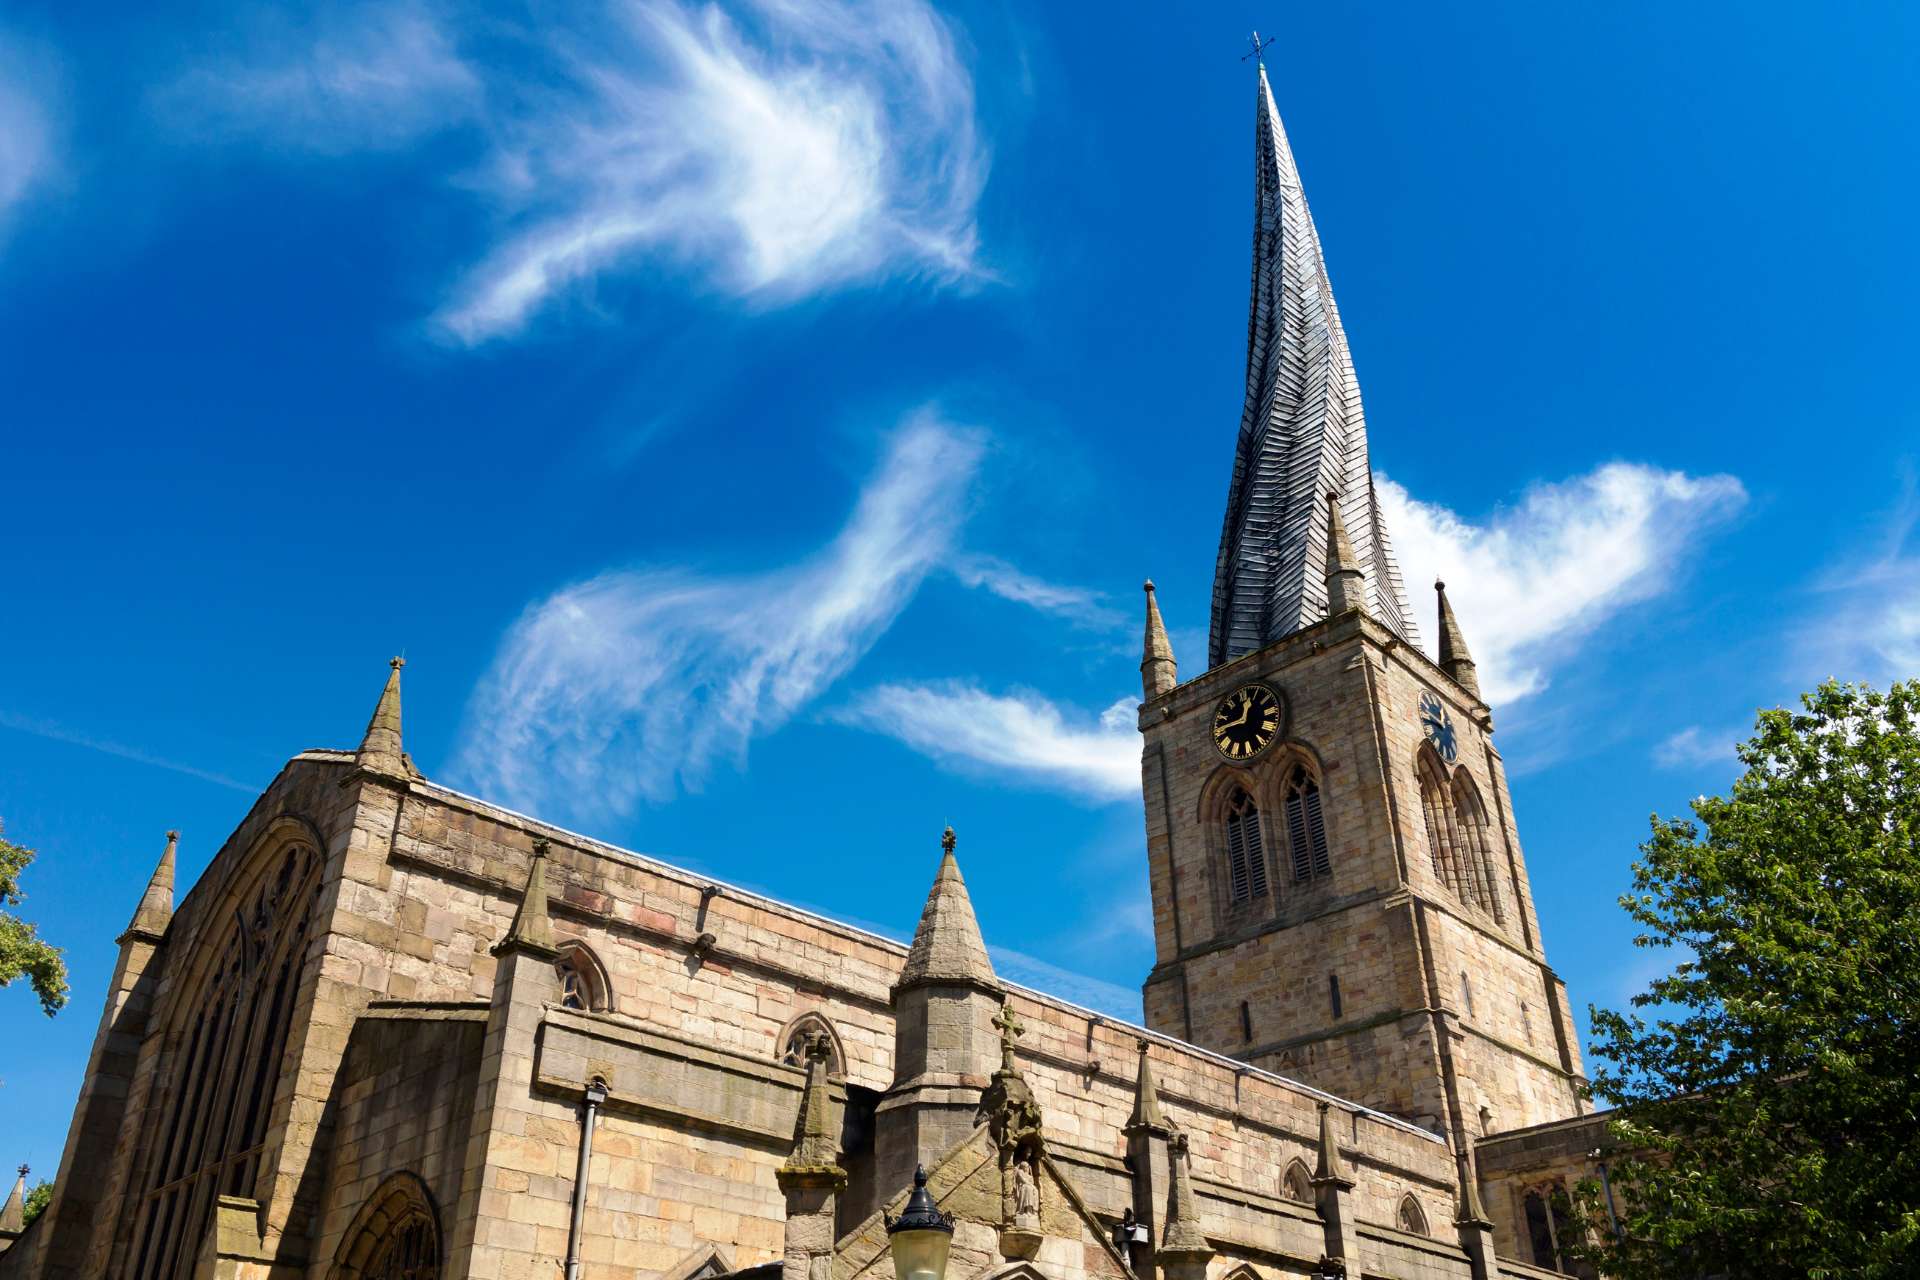 Crooked Spire in Chesterfield, Derbyshire